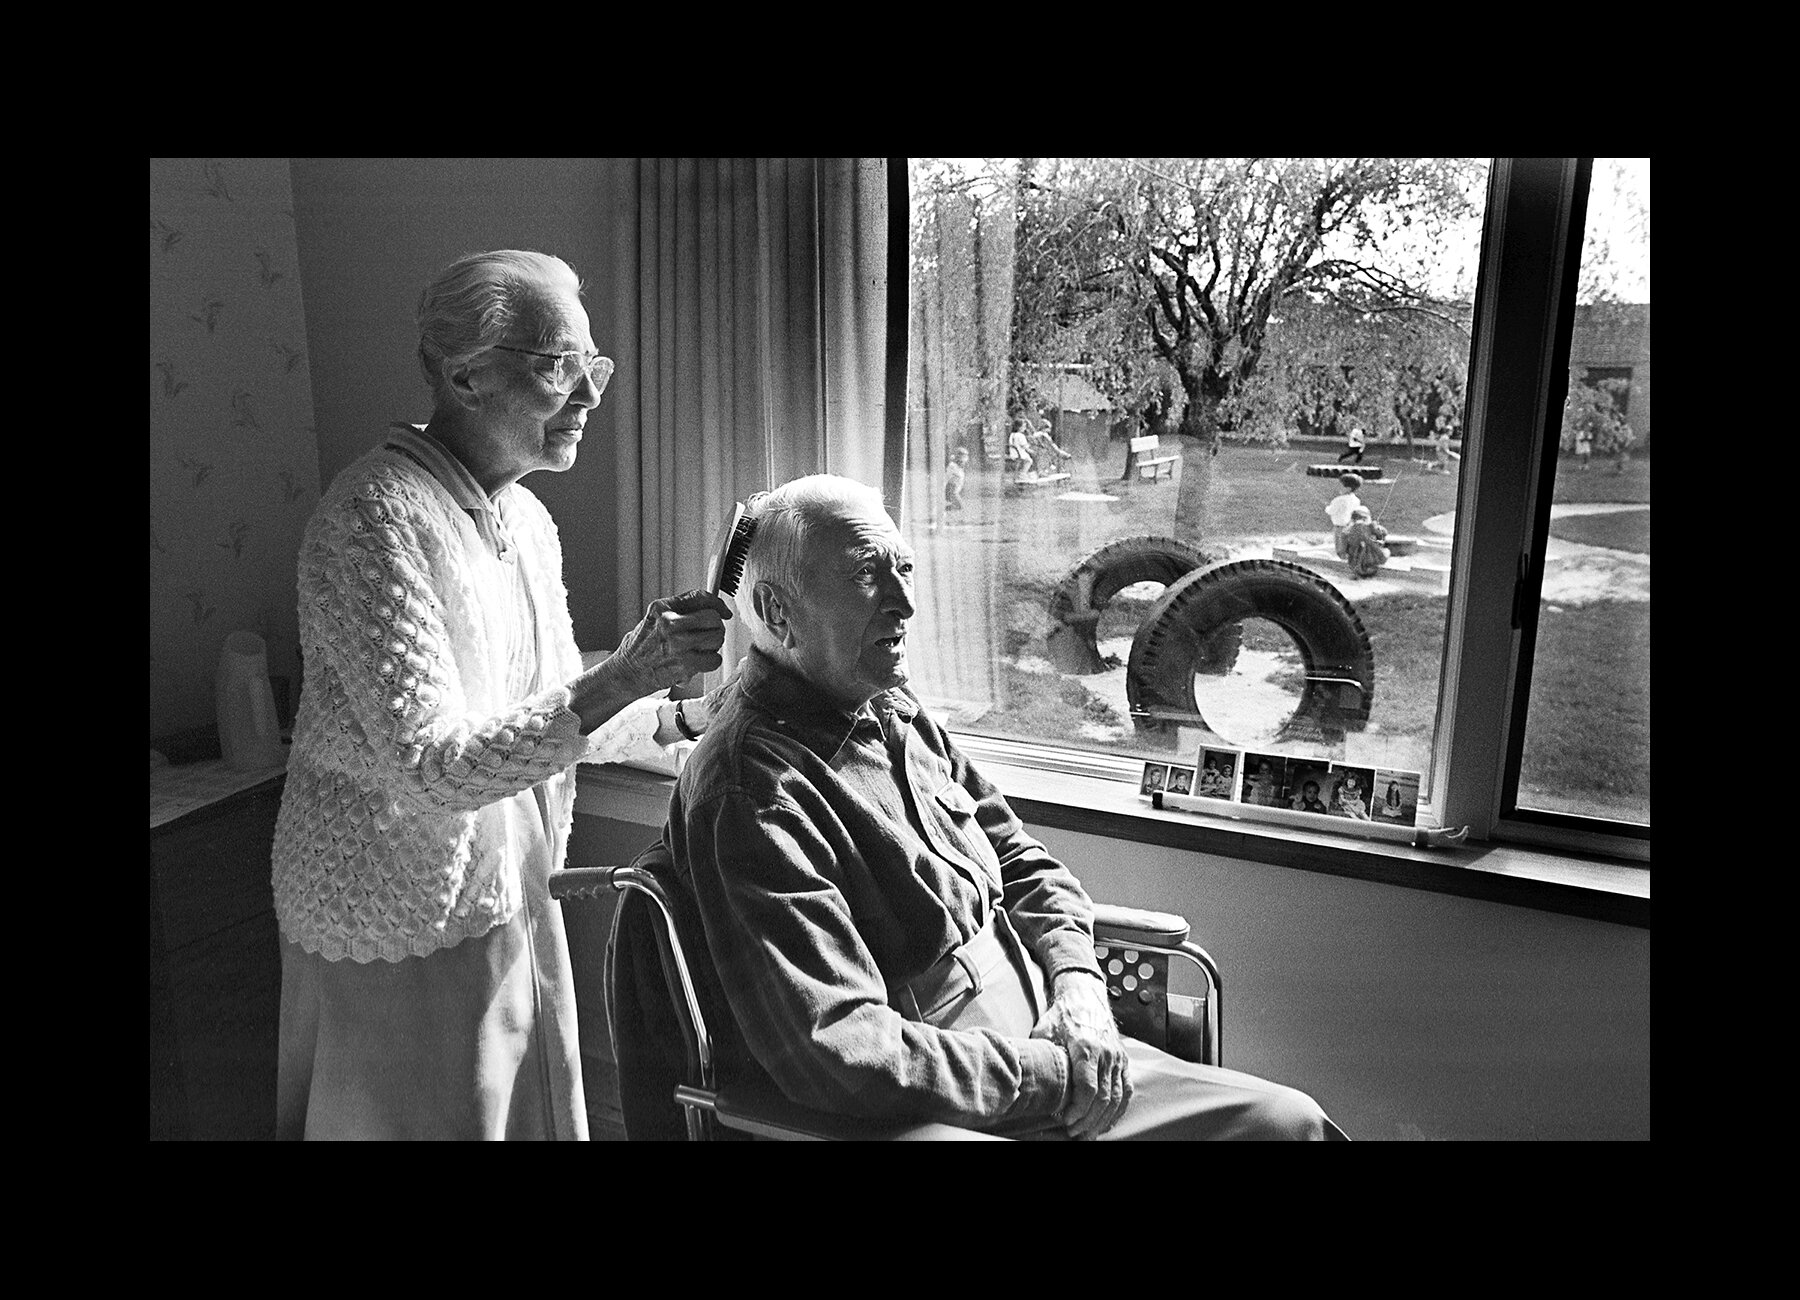  A woman brushes her husband’s hair at Messiah Village, a Christian retirement community in Mechanicsburg, Pennsylvania. 1997 